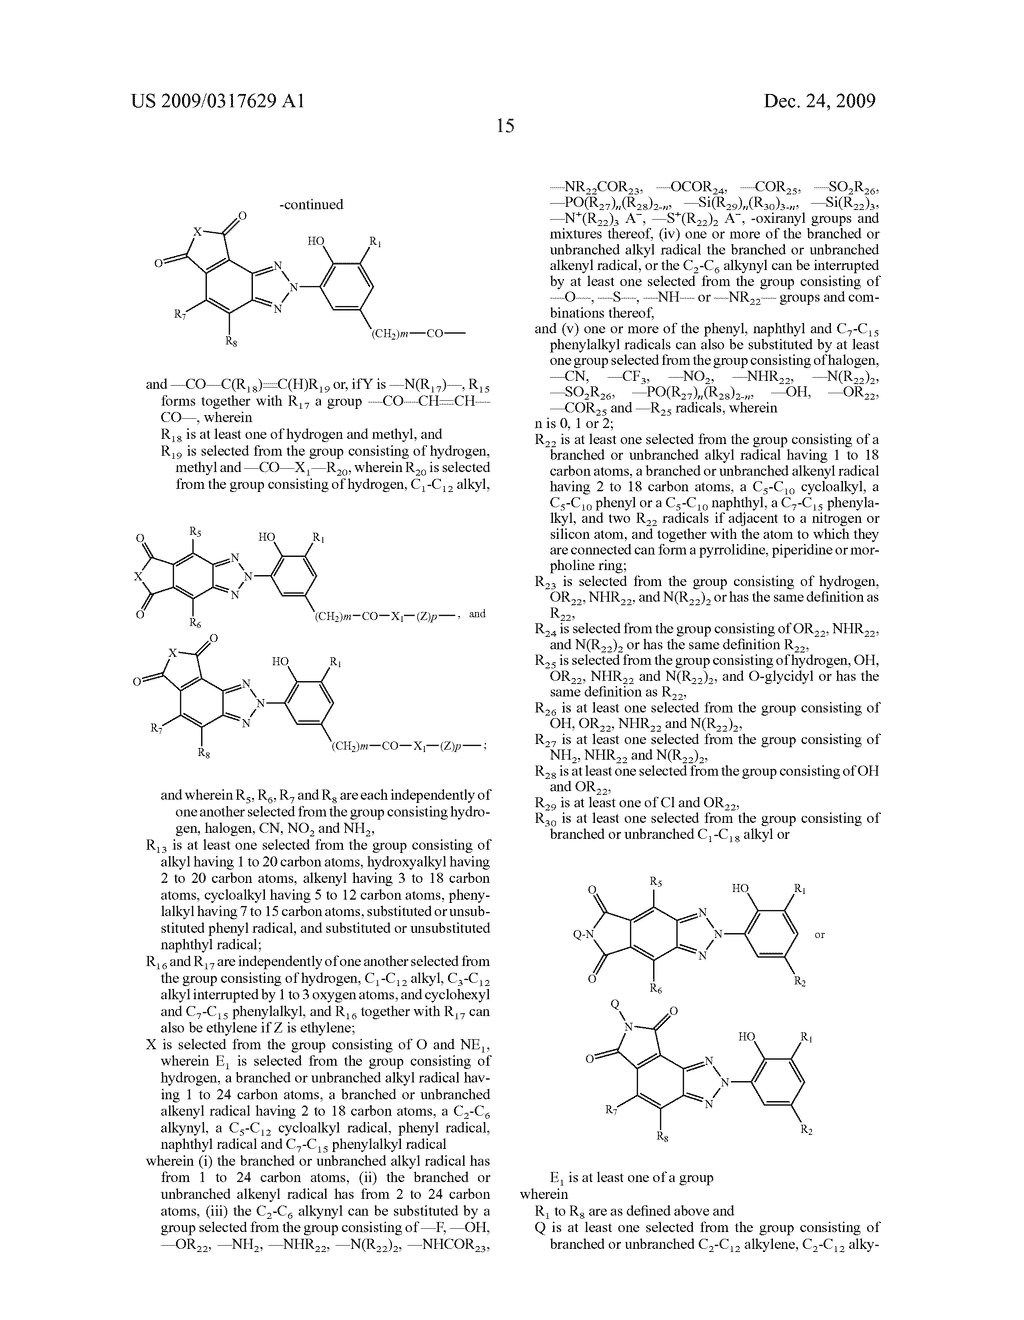 MULTICOAT PAINT SYSTEMS, PROCESS FOR PRODUCING THEM, AND THEIR USE IN AUTOMAKING - diagram, schematic, and image 16